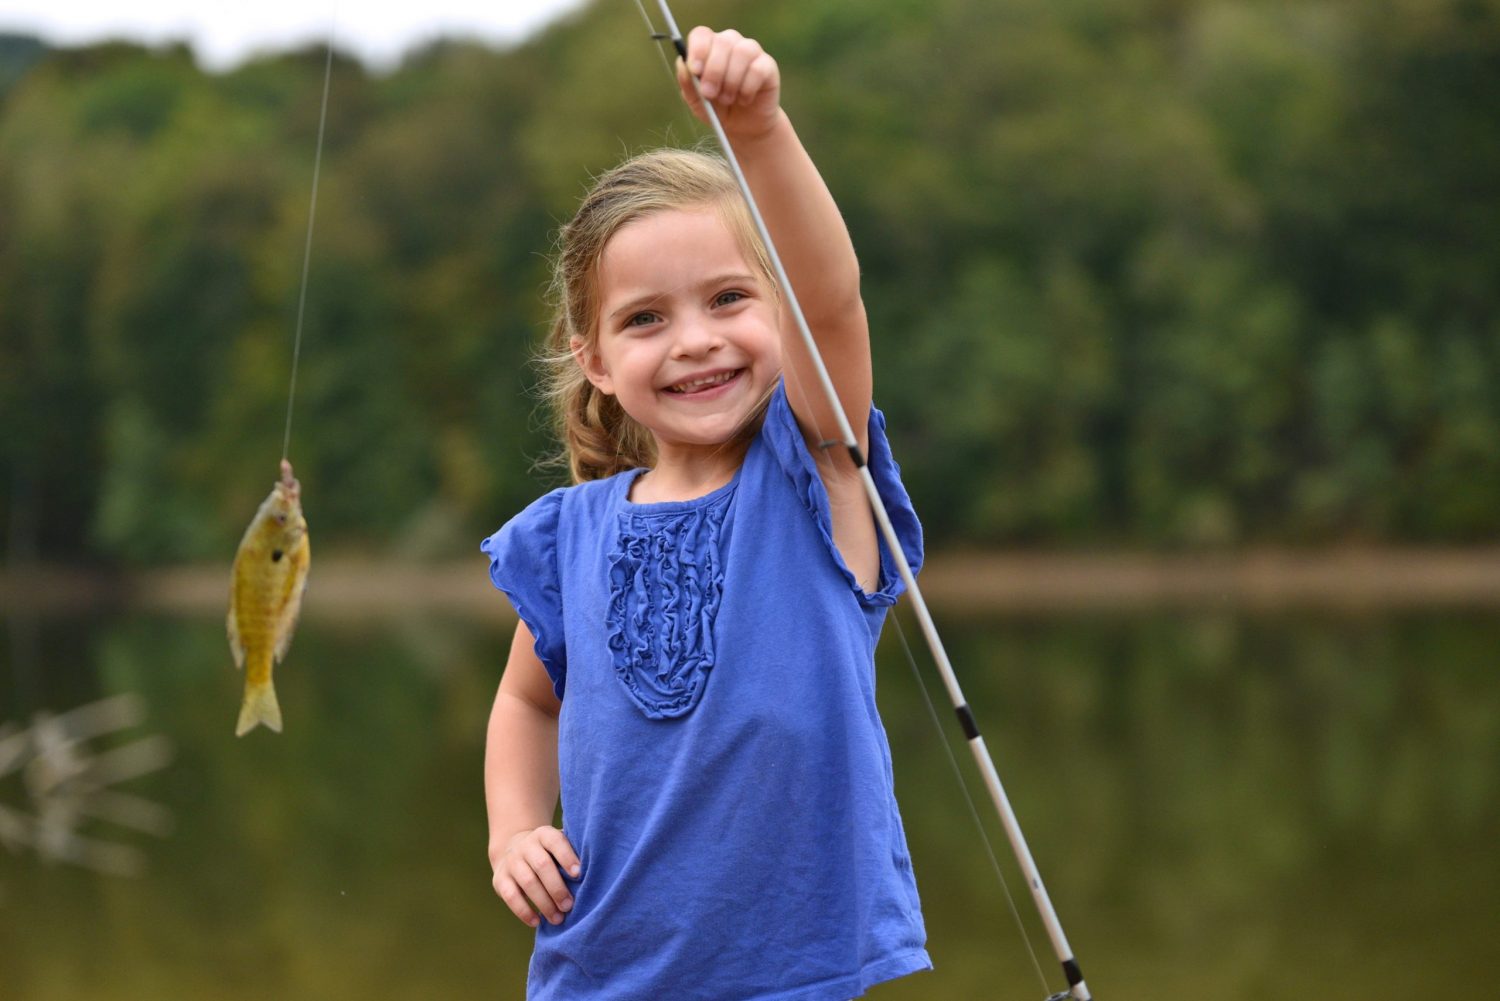 Free fishing in state: No time like the present to learn how to